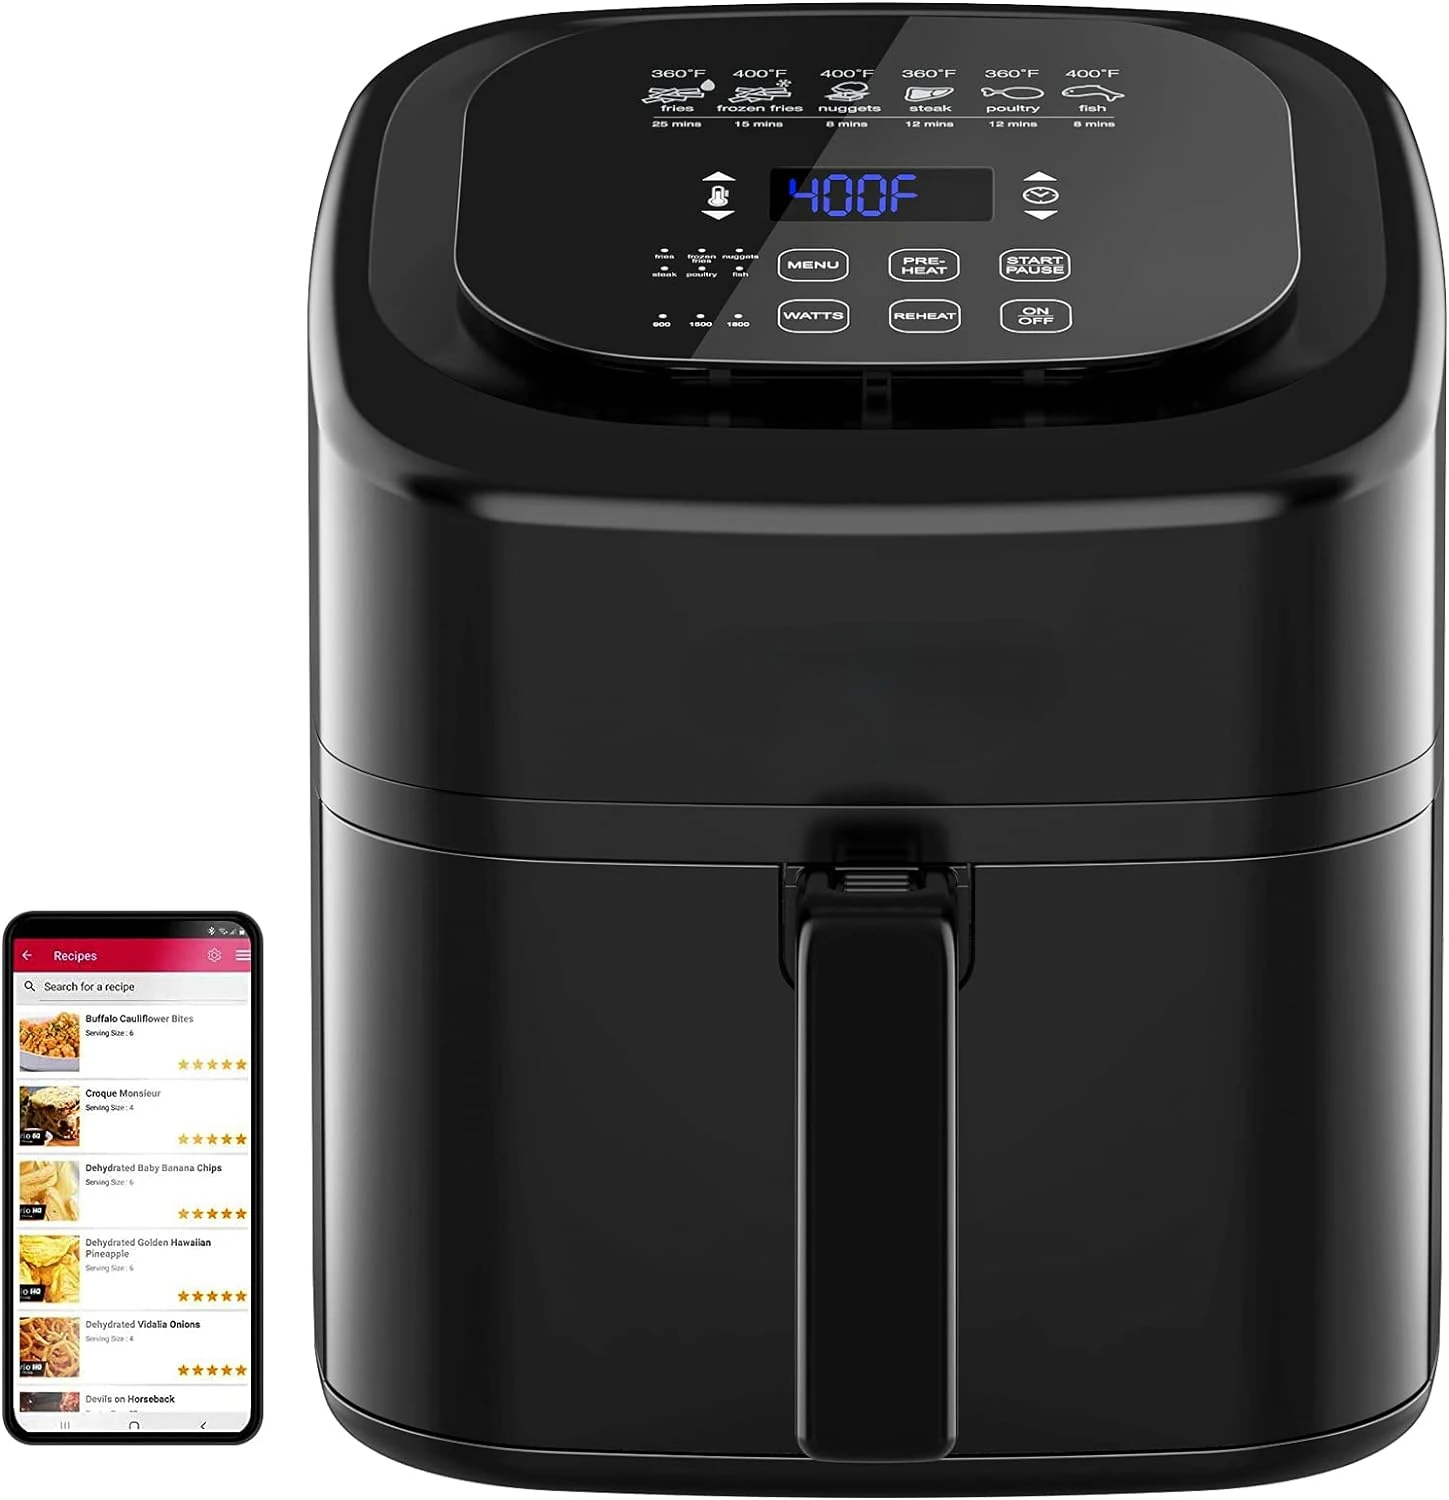 

Healthy Digital Air Fryer with One-Touch Digital Controls, 6 Preset Menu Functions & Removable Divider Insert, Black